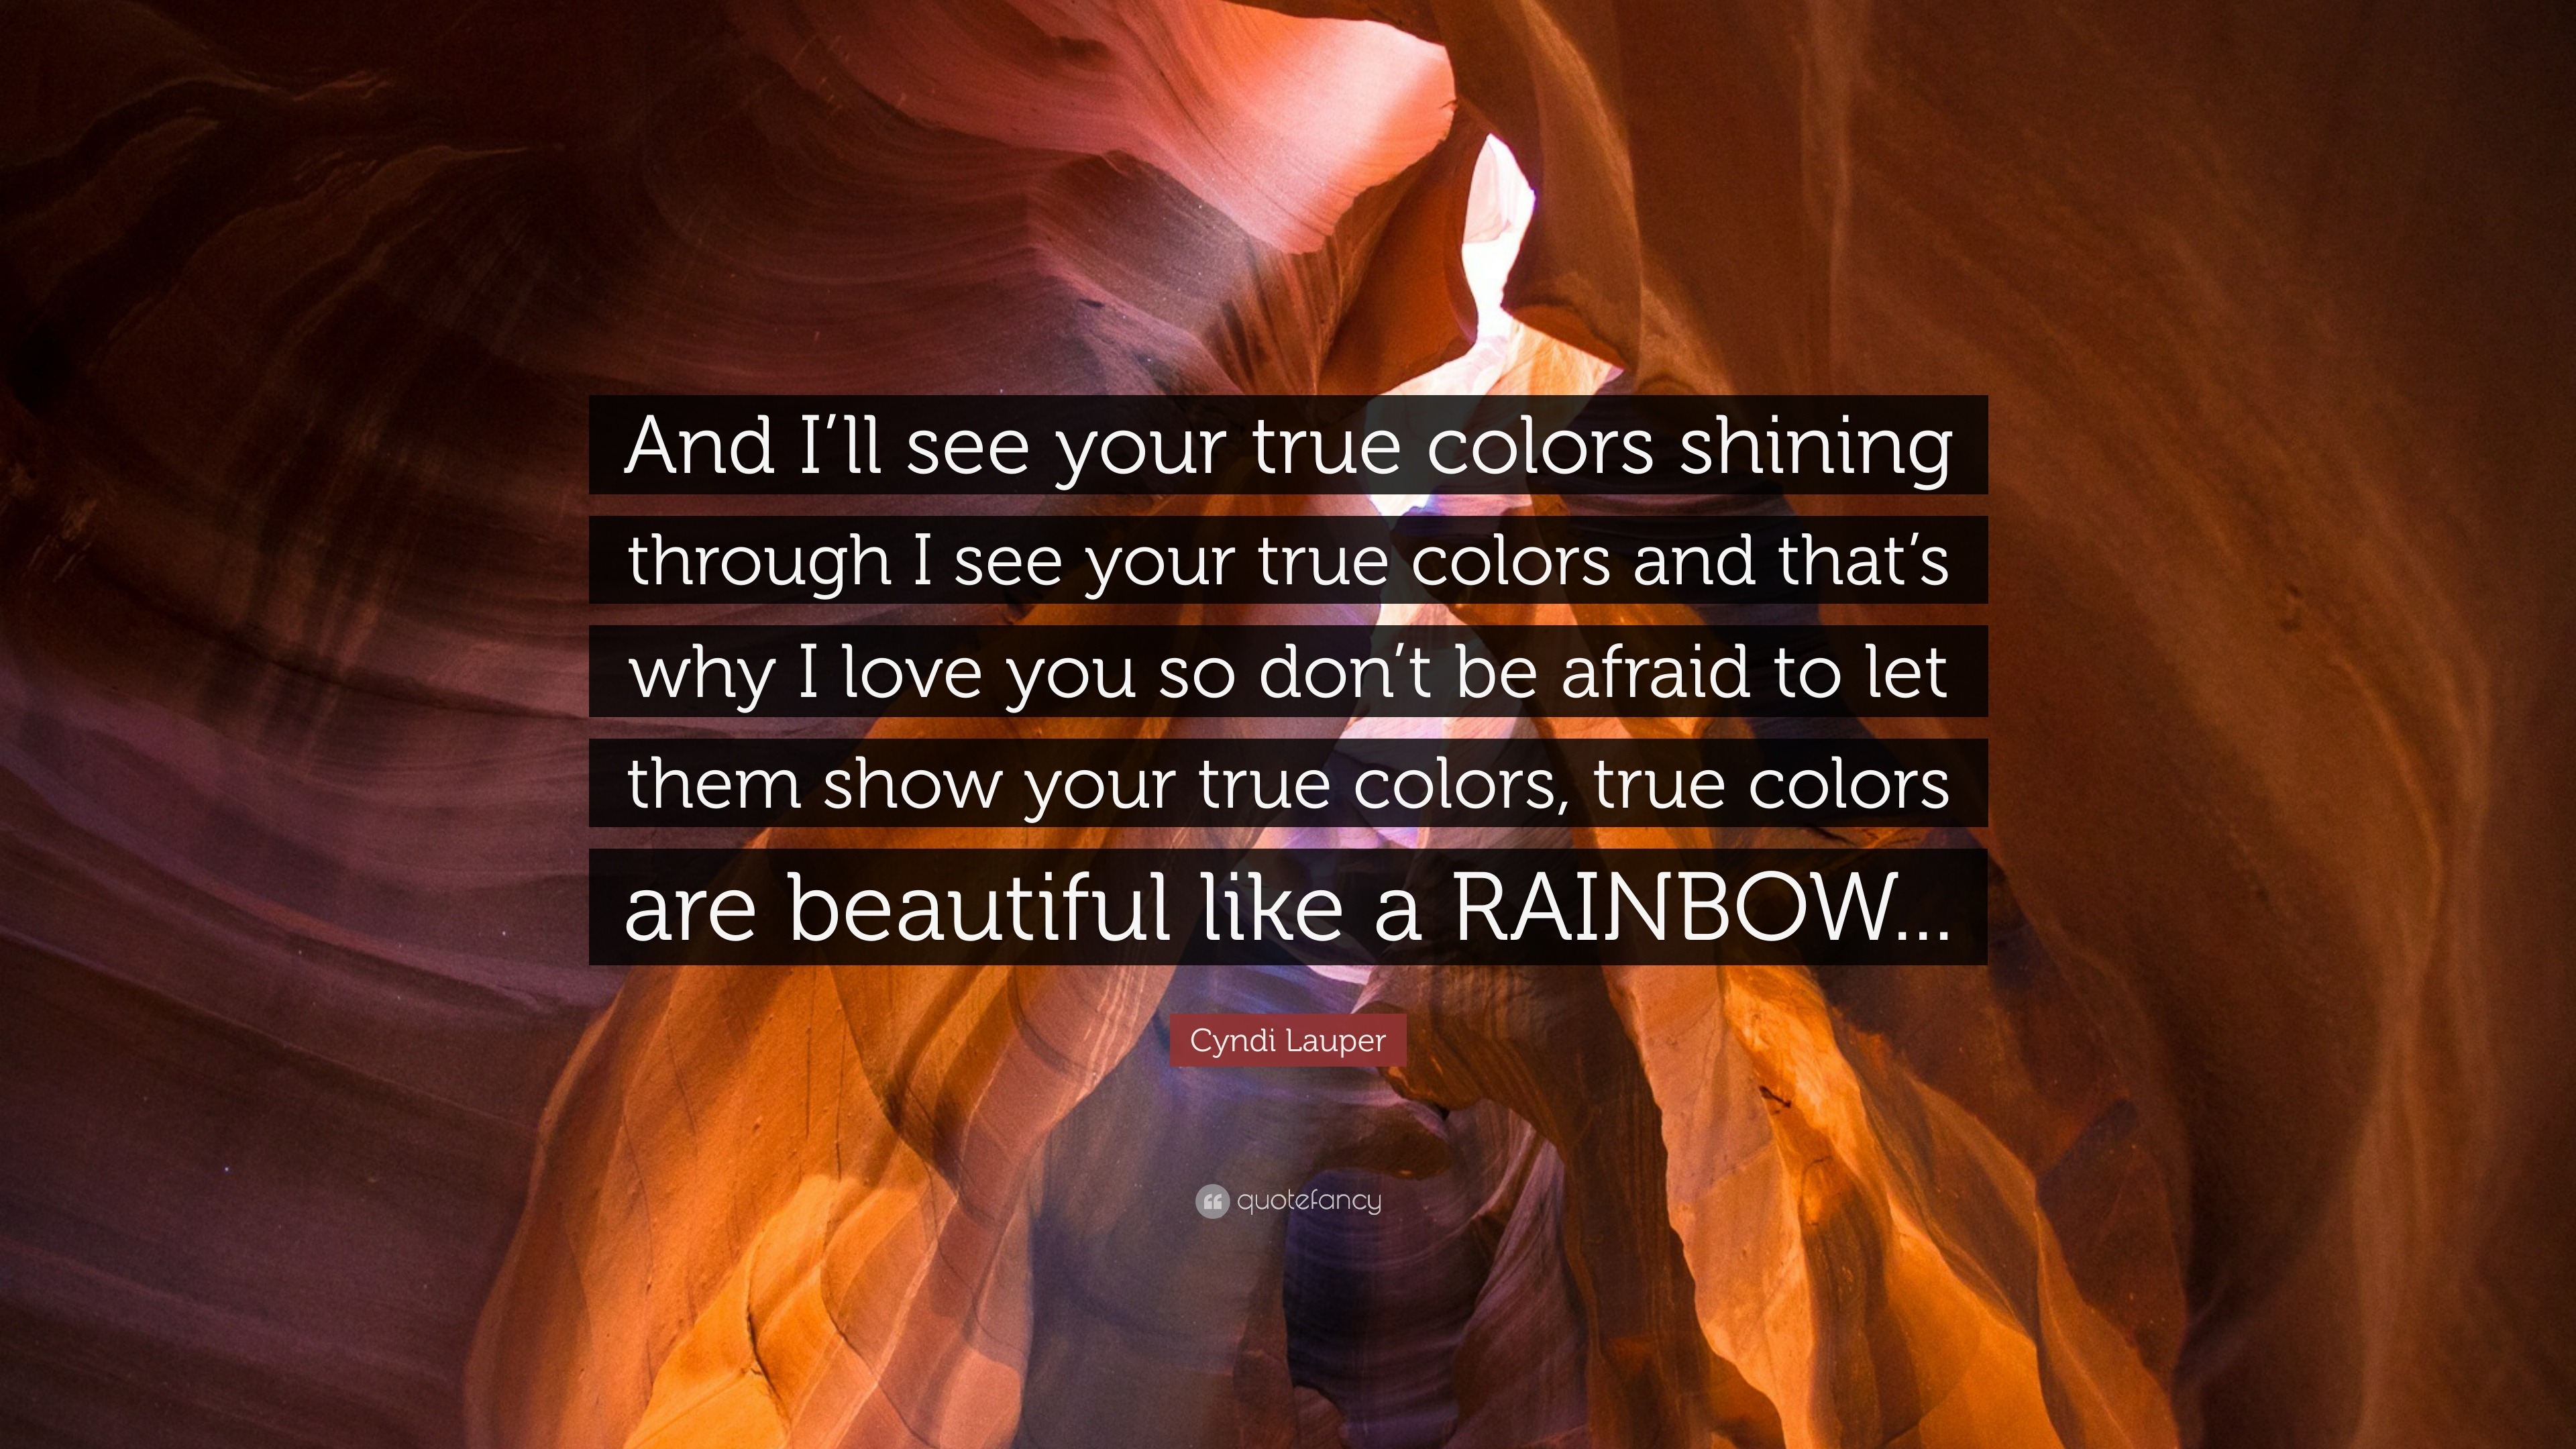 Cyndi Lauper Quote: “And I’ll see your true colors shining through I ...